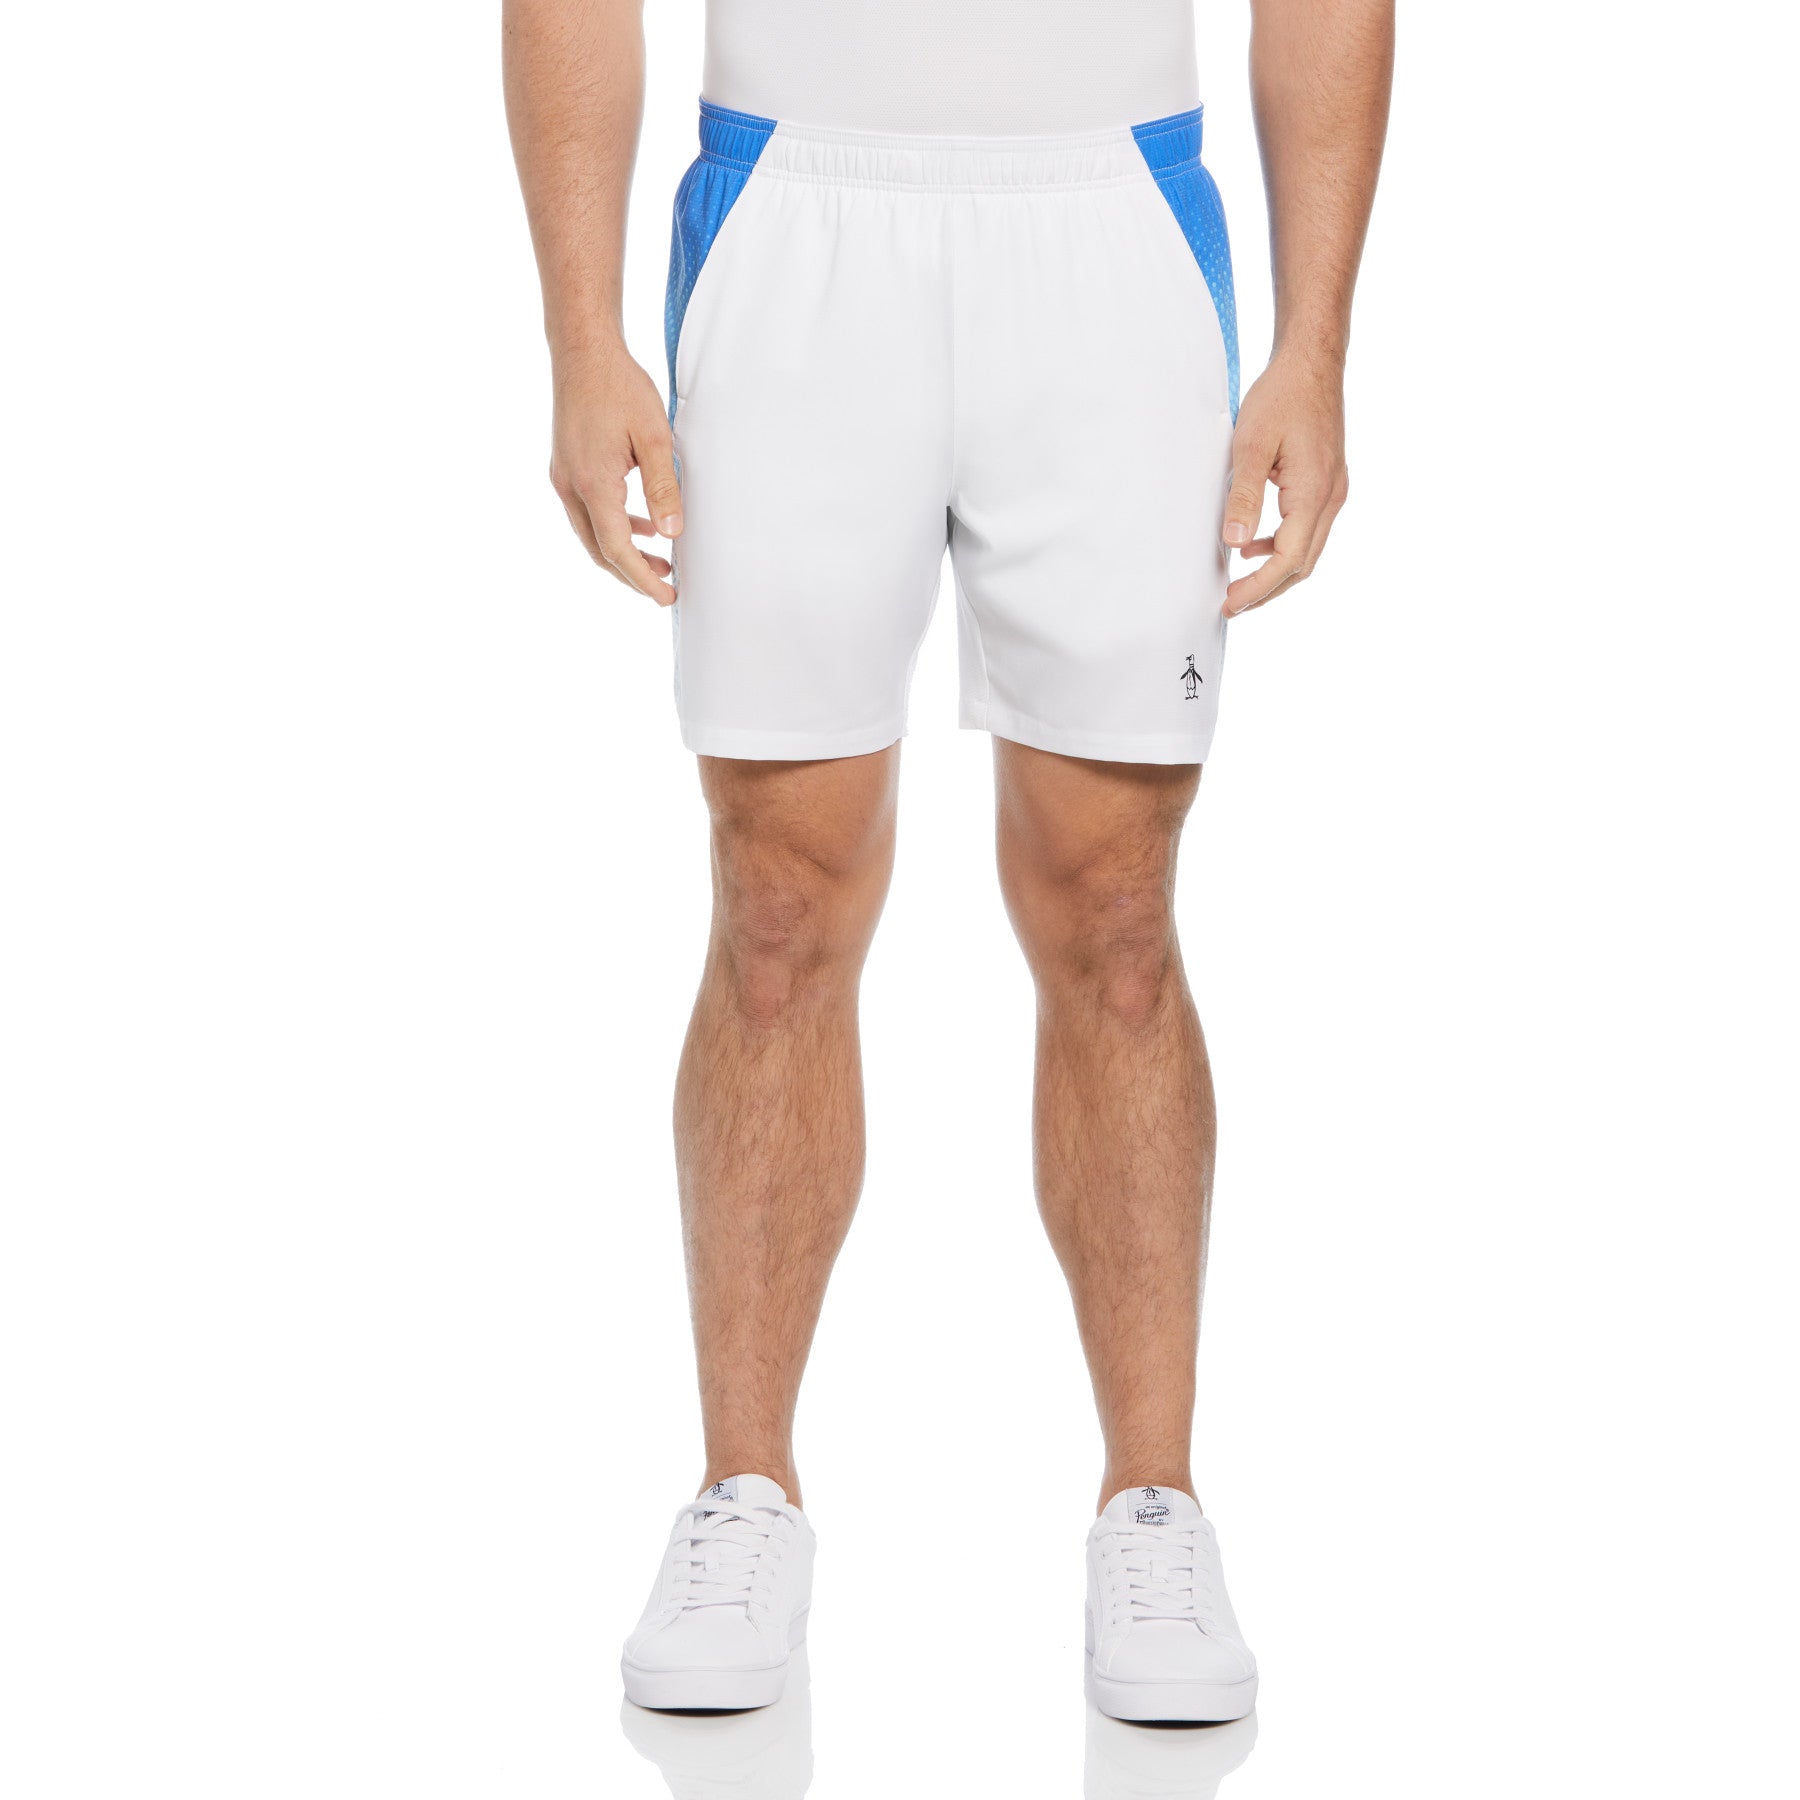 View Tennis Performance 7 Inseam Ombre Colour Block Shorts In Bright White information